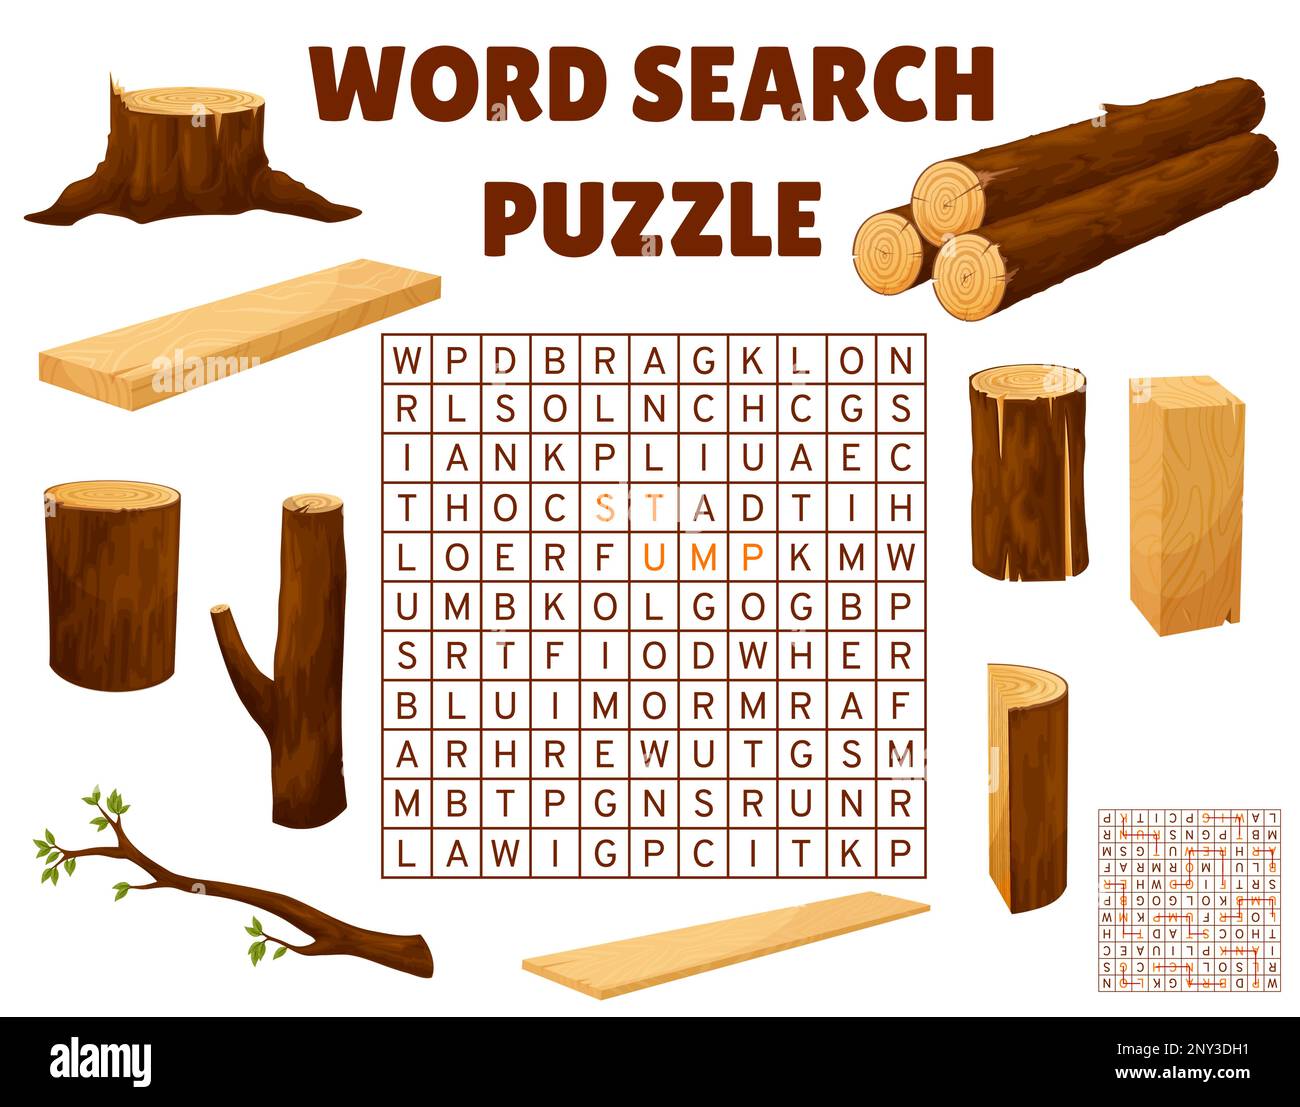 Timber and lumber word search puzzle game worksheet Vector crossword